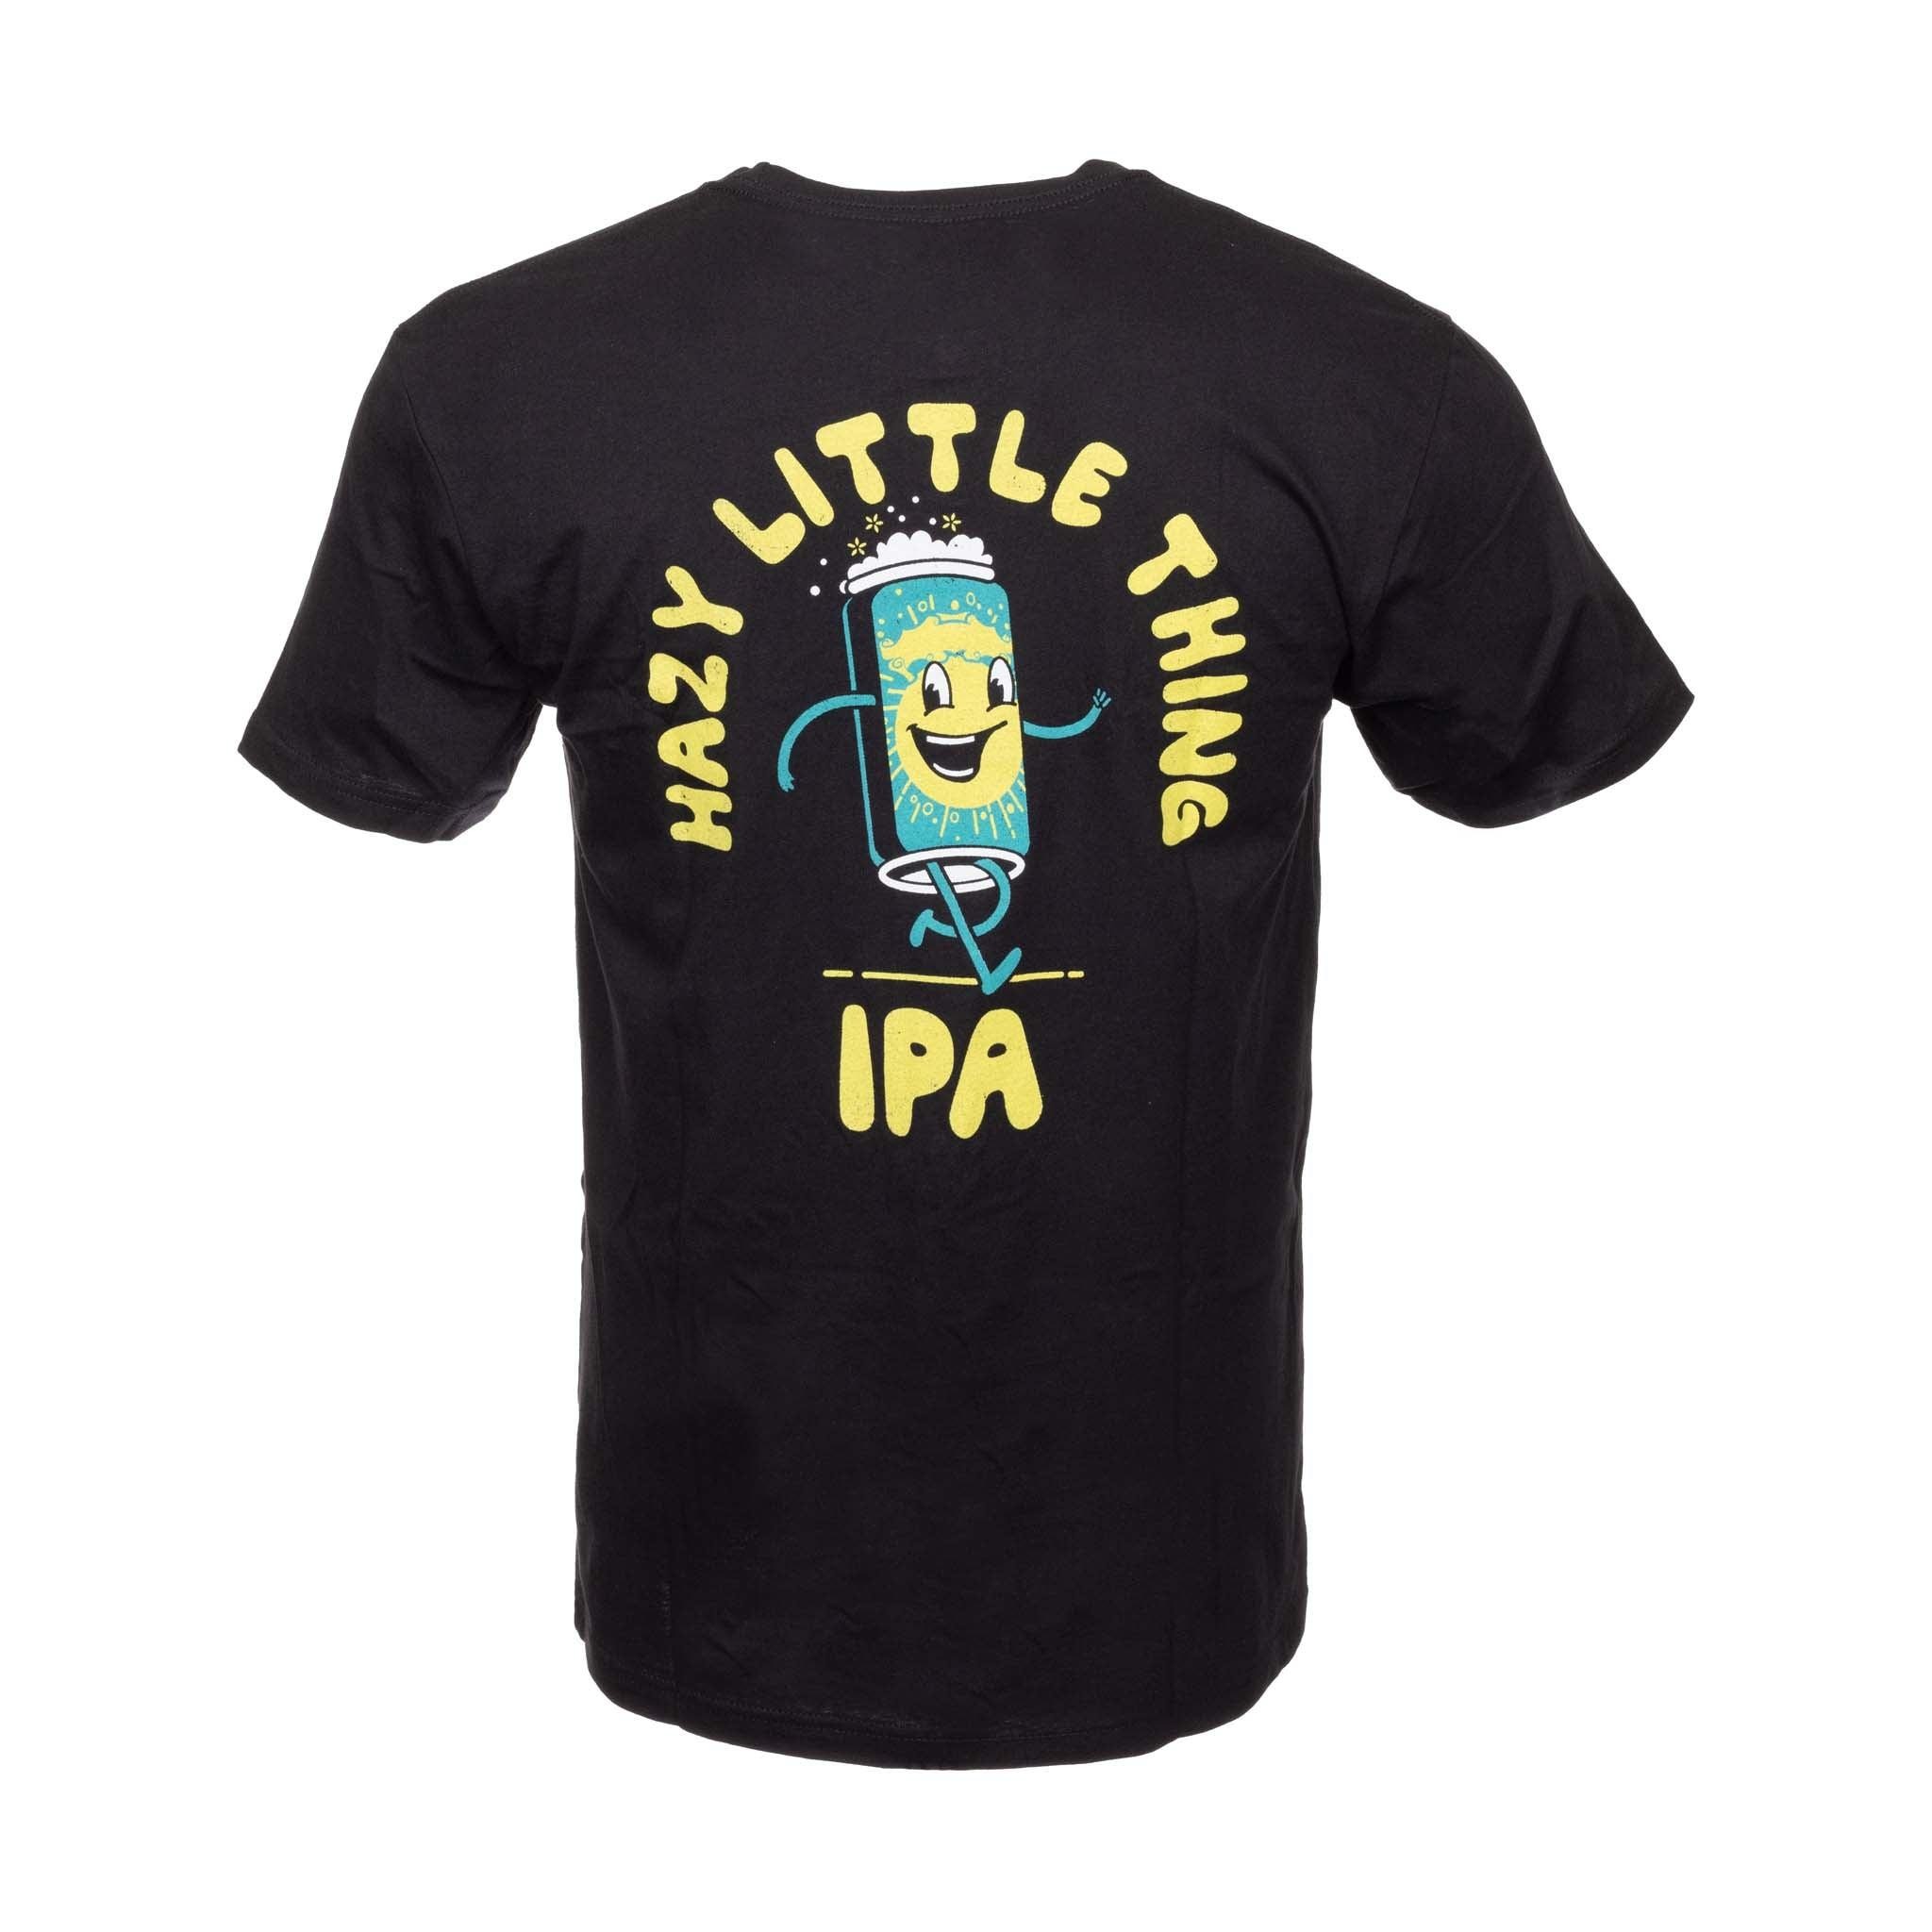 Hazy Little Thing Psychedelic T-Shirt - S